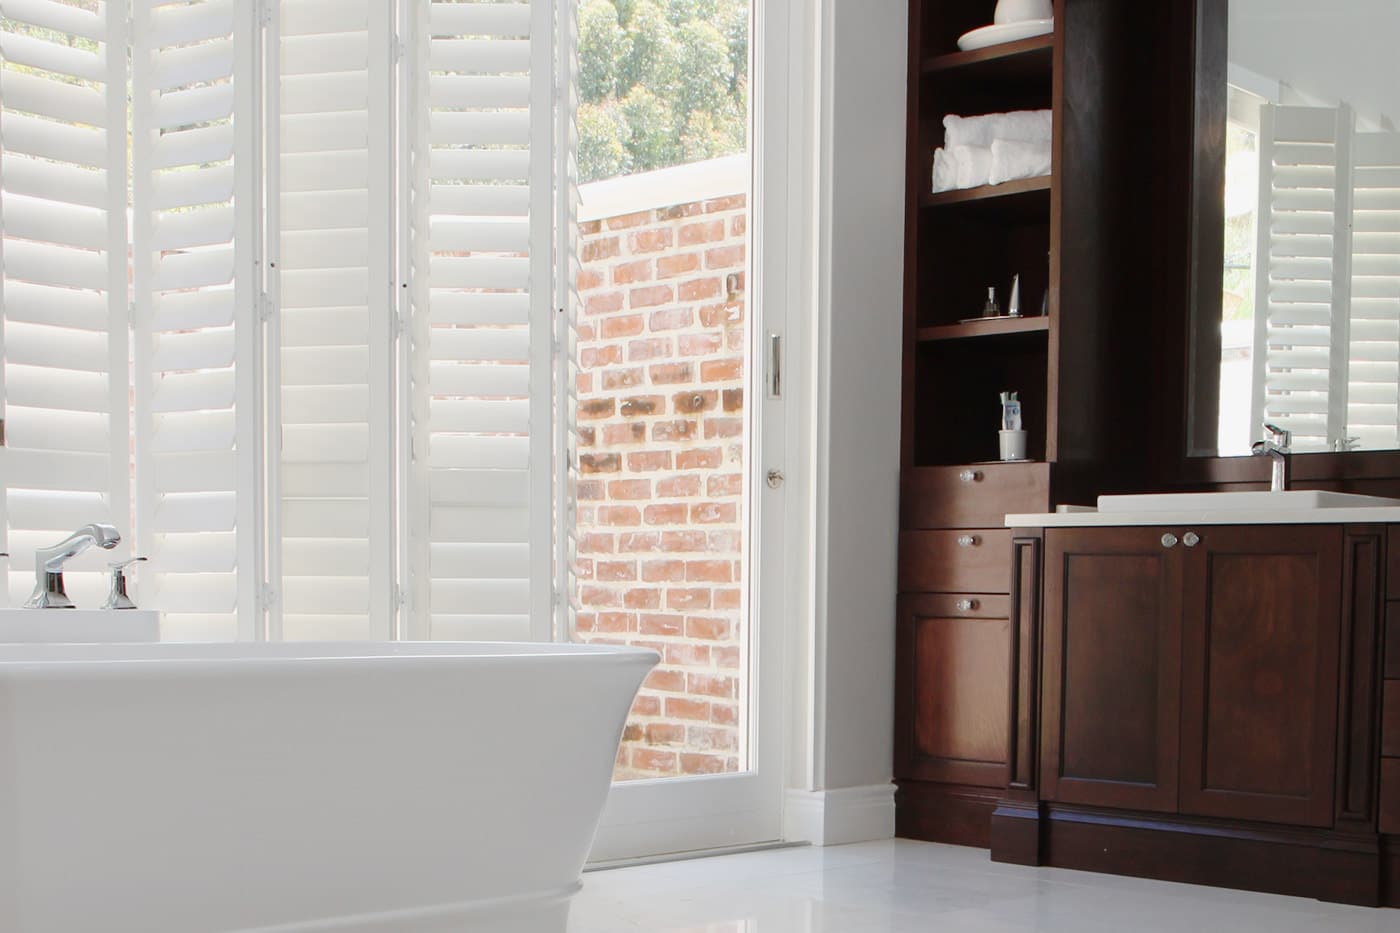 Norman Woodlore Plus Shutters installed in a modern and simple bathroom.